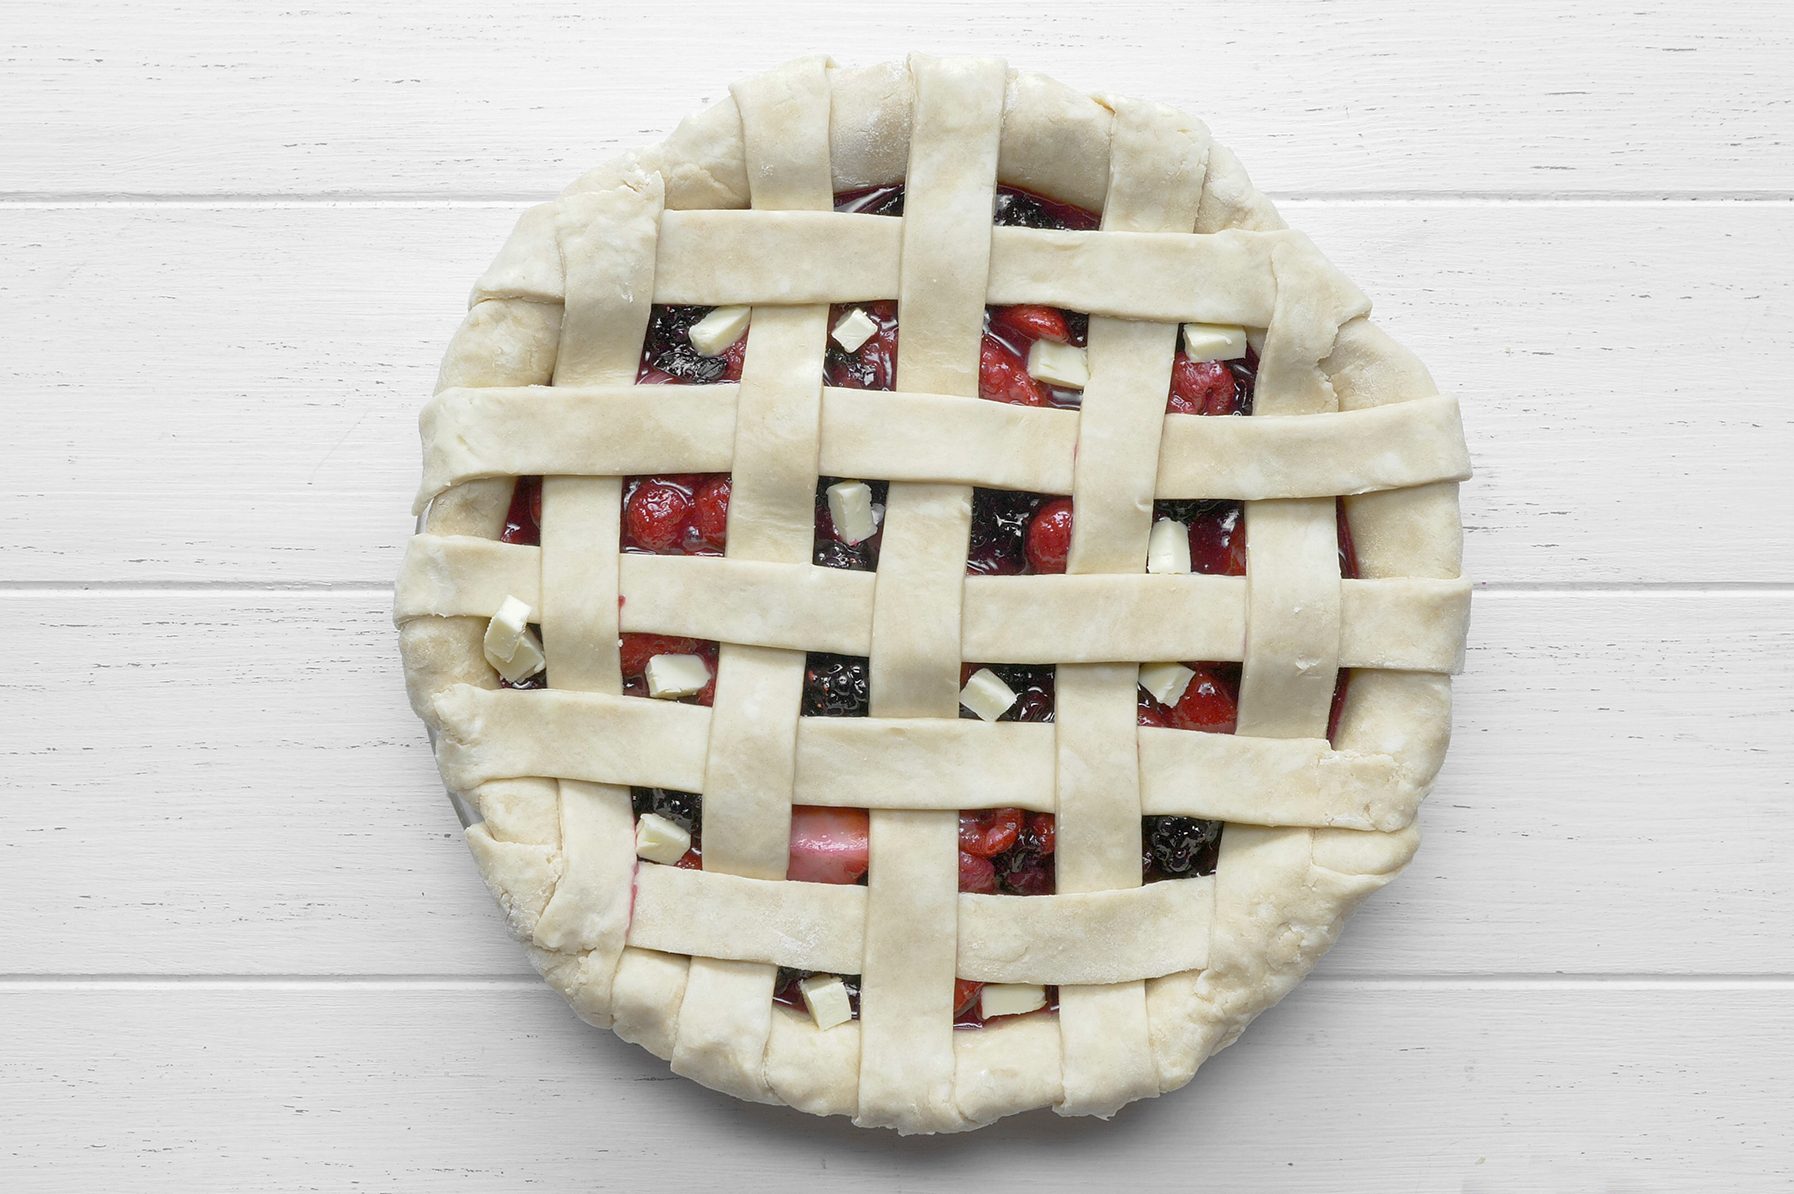 A top-down view of a lattice-topped cherry and berry pie on a white wooden surface. The golden-brown crust forms a woven pattern, revealing the red and dark purple fruits underneath. 